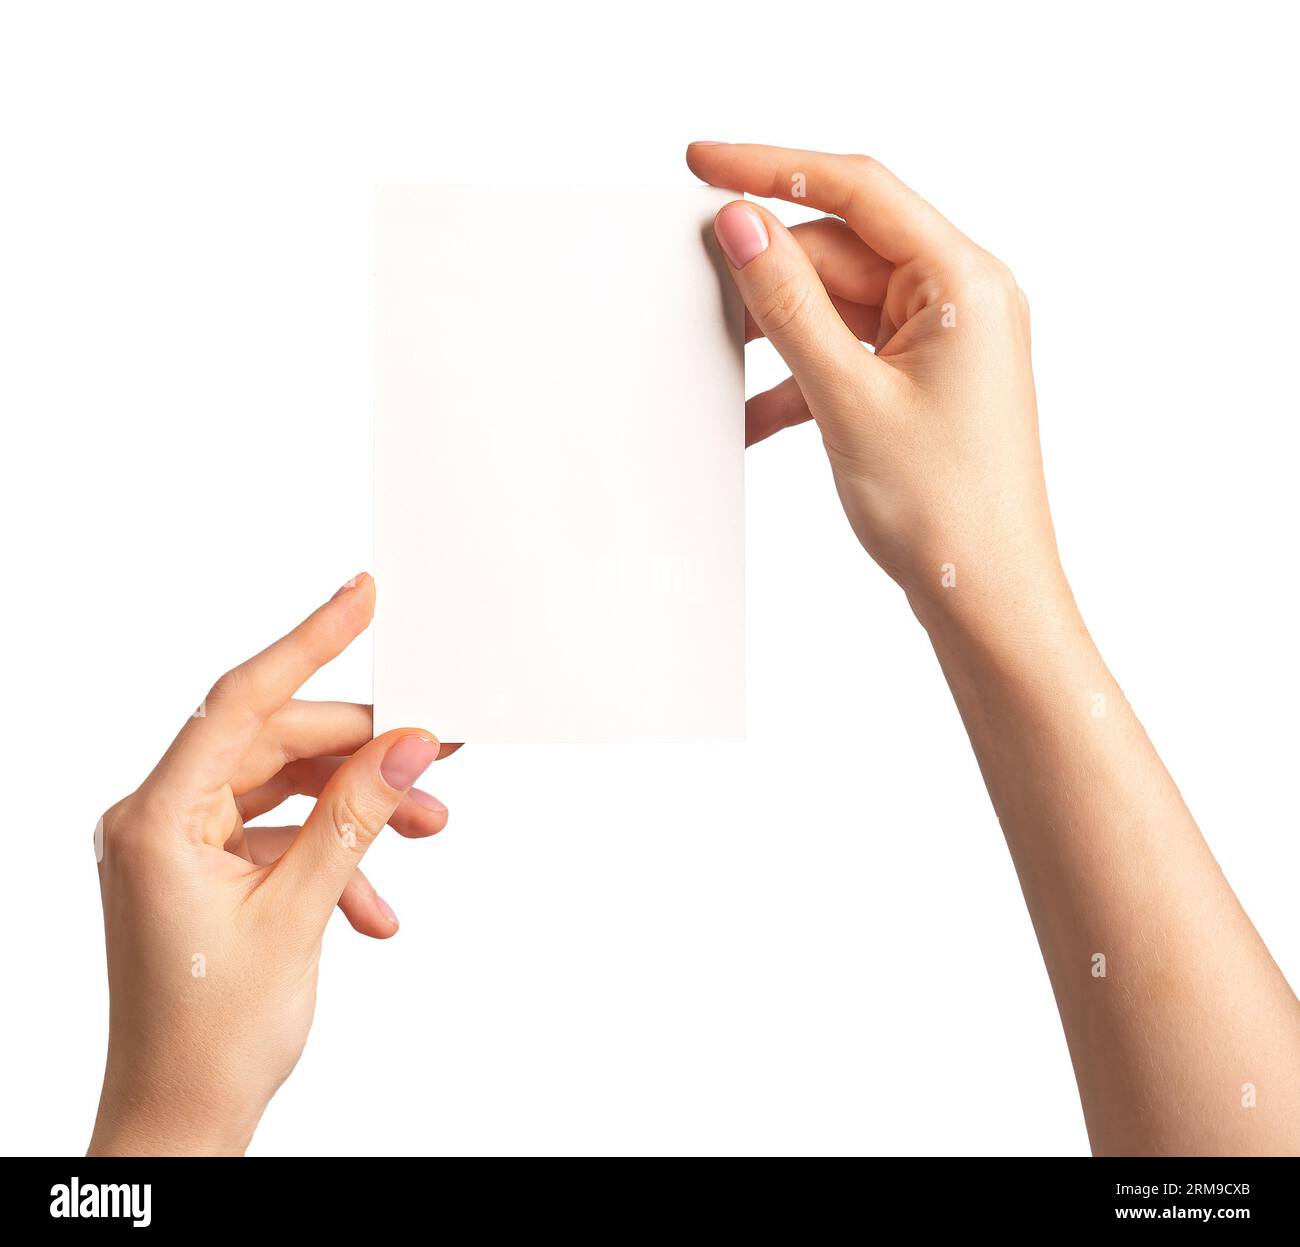 Hands holding greeting card mockup, blank postcard isolated on white background. Stock Photo